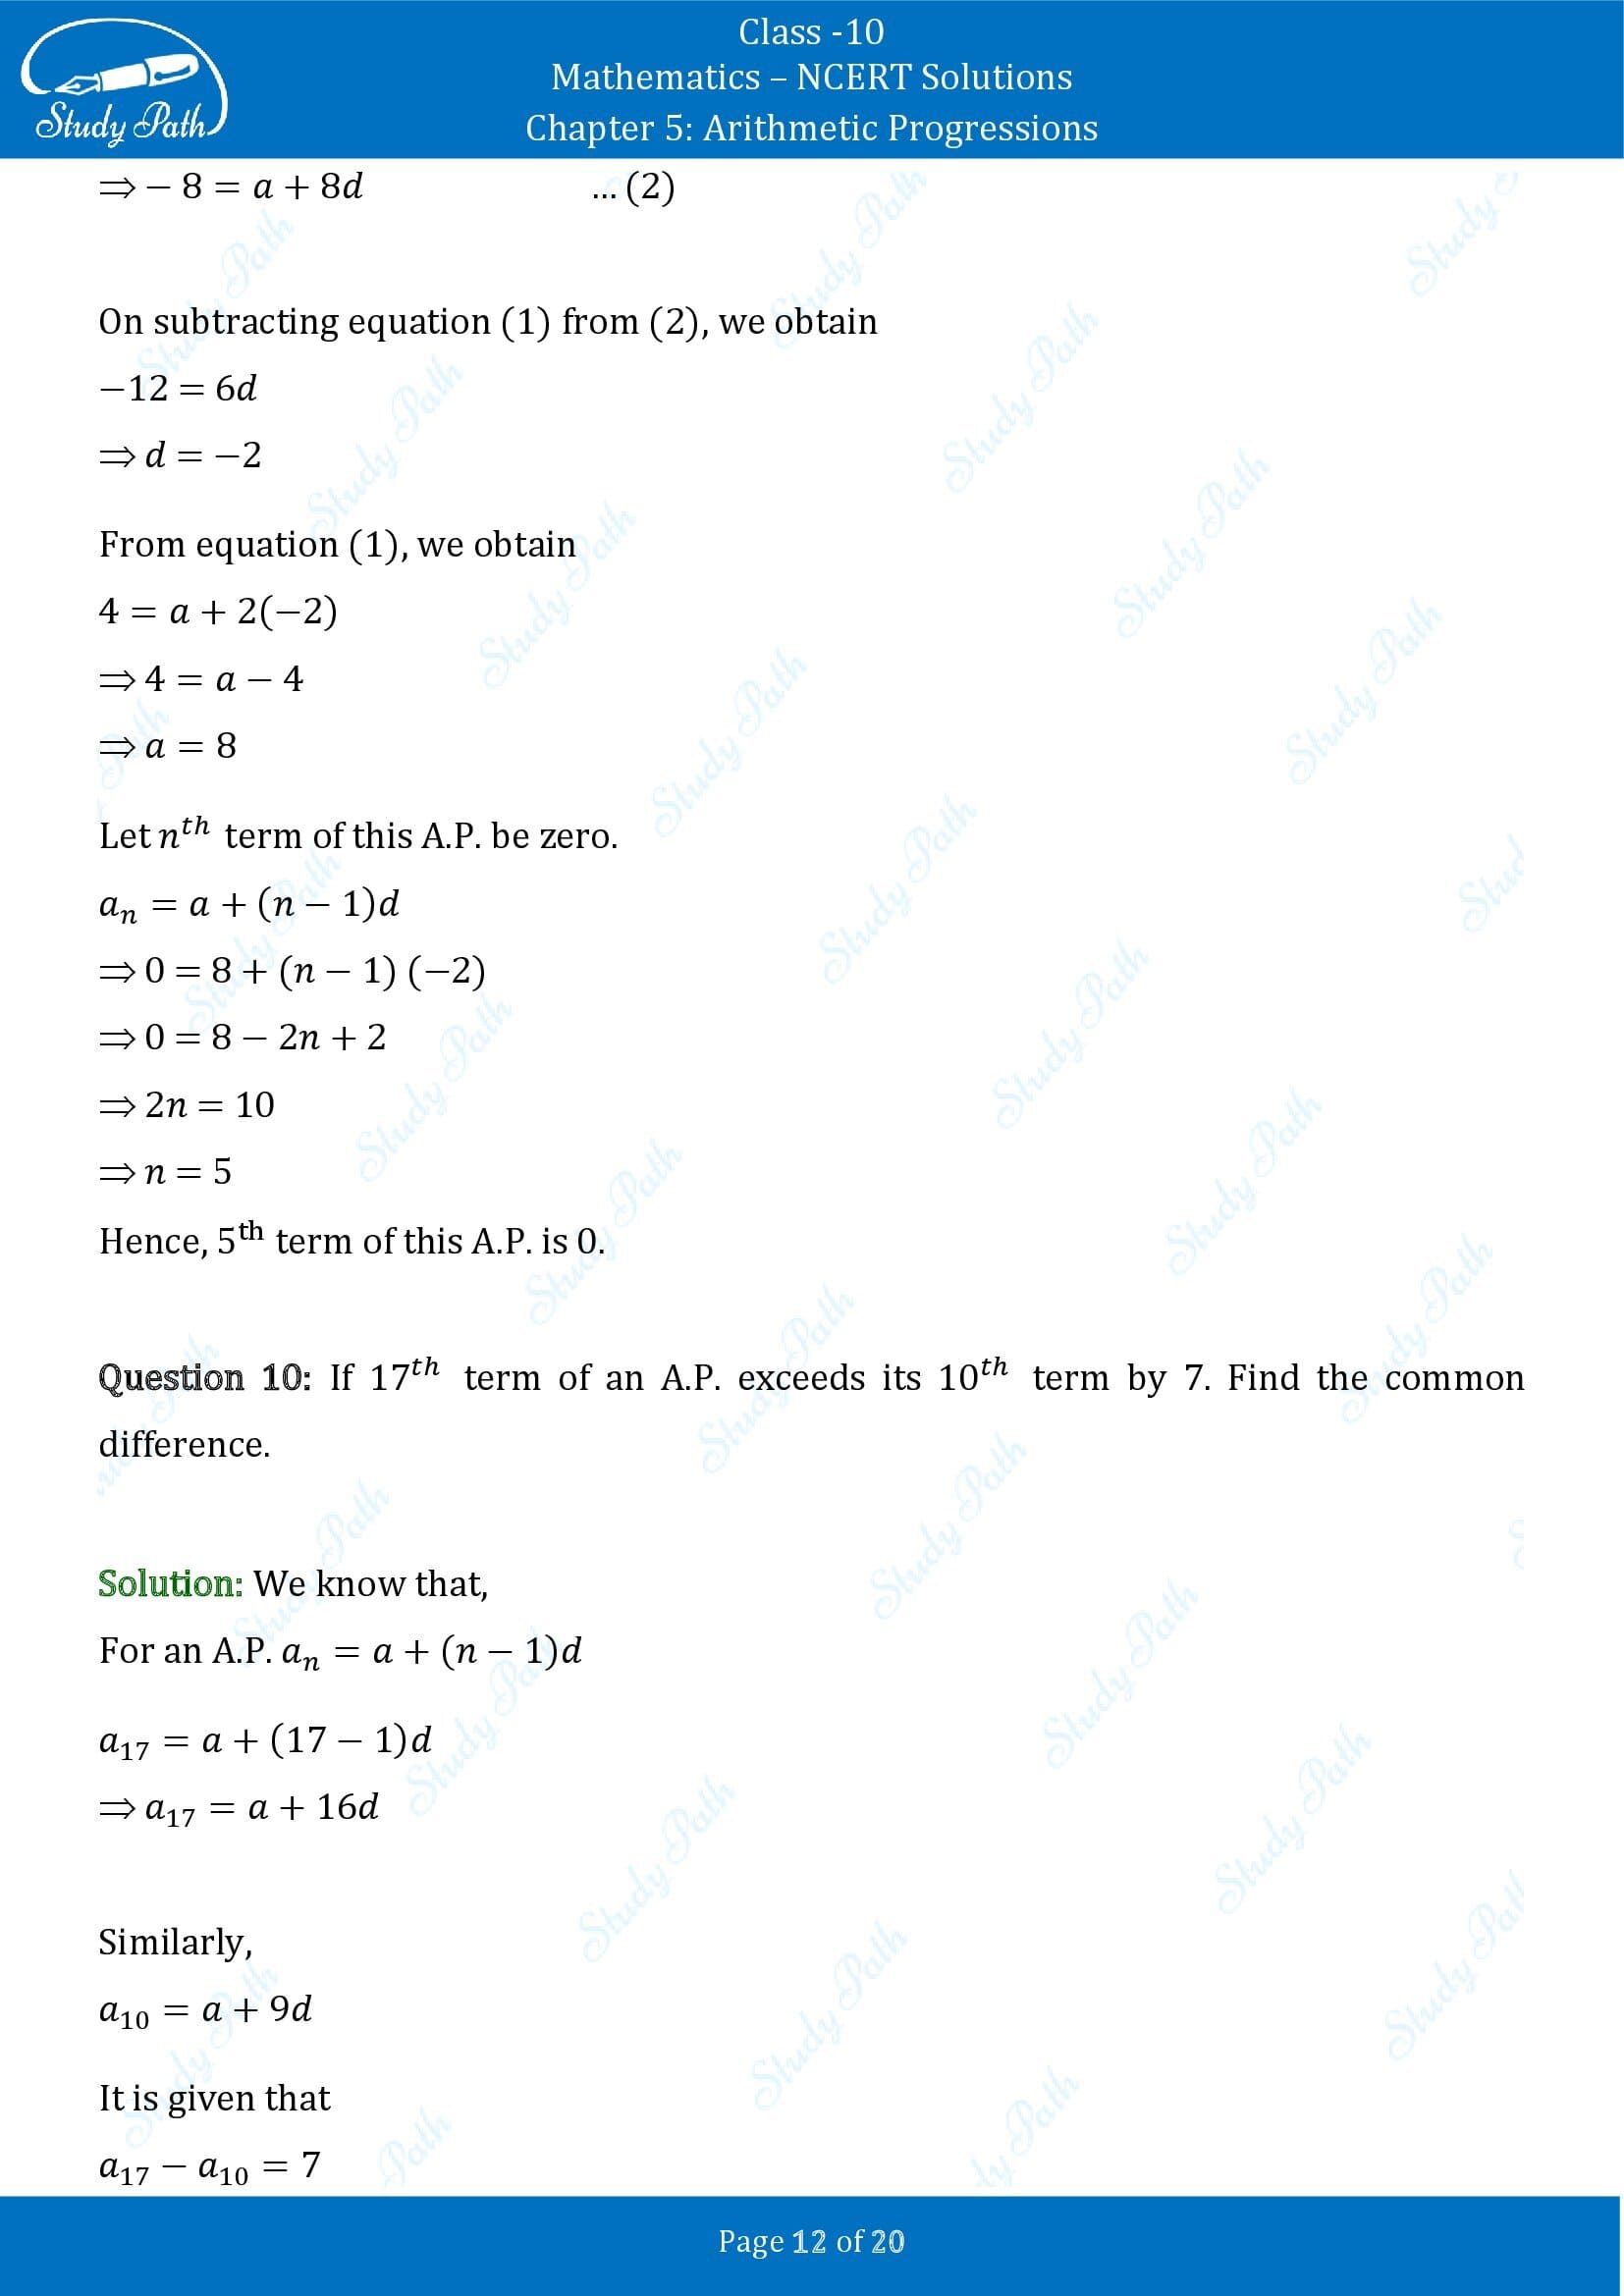 NCERT Solutions for Class 10 Maths Chapter 5 Arithmetic Progressions Exercise 5.2 00012